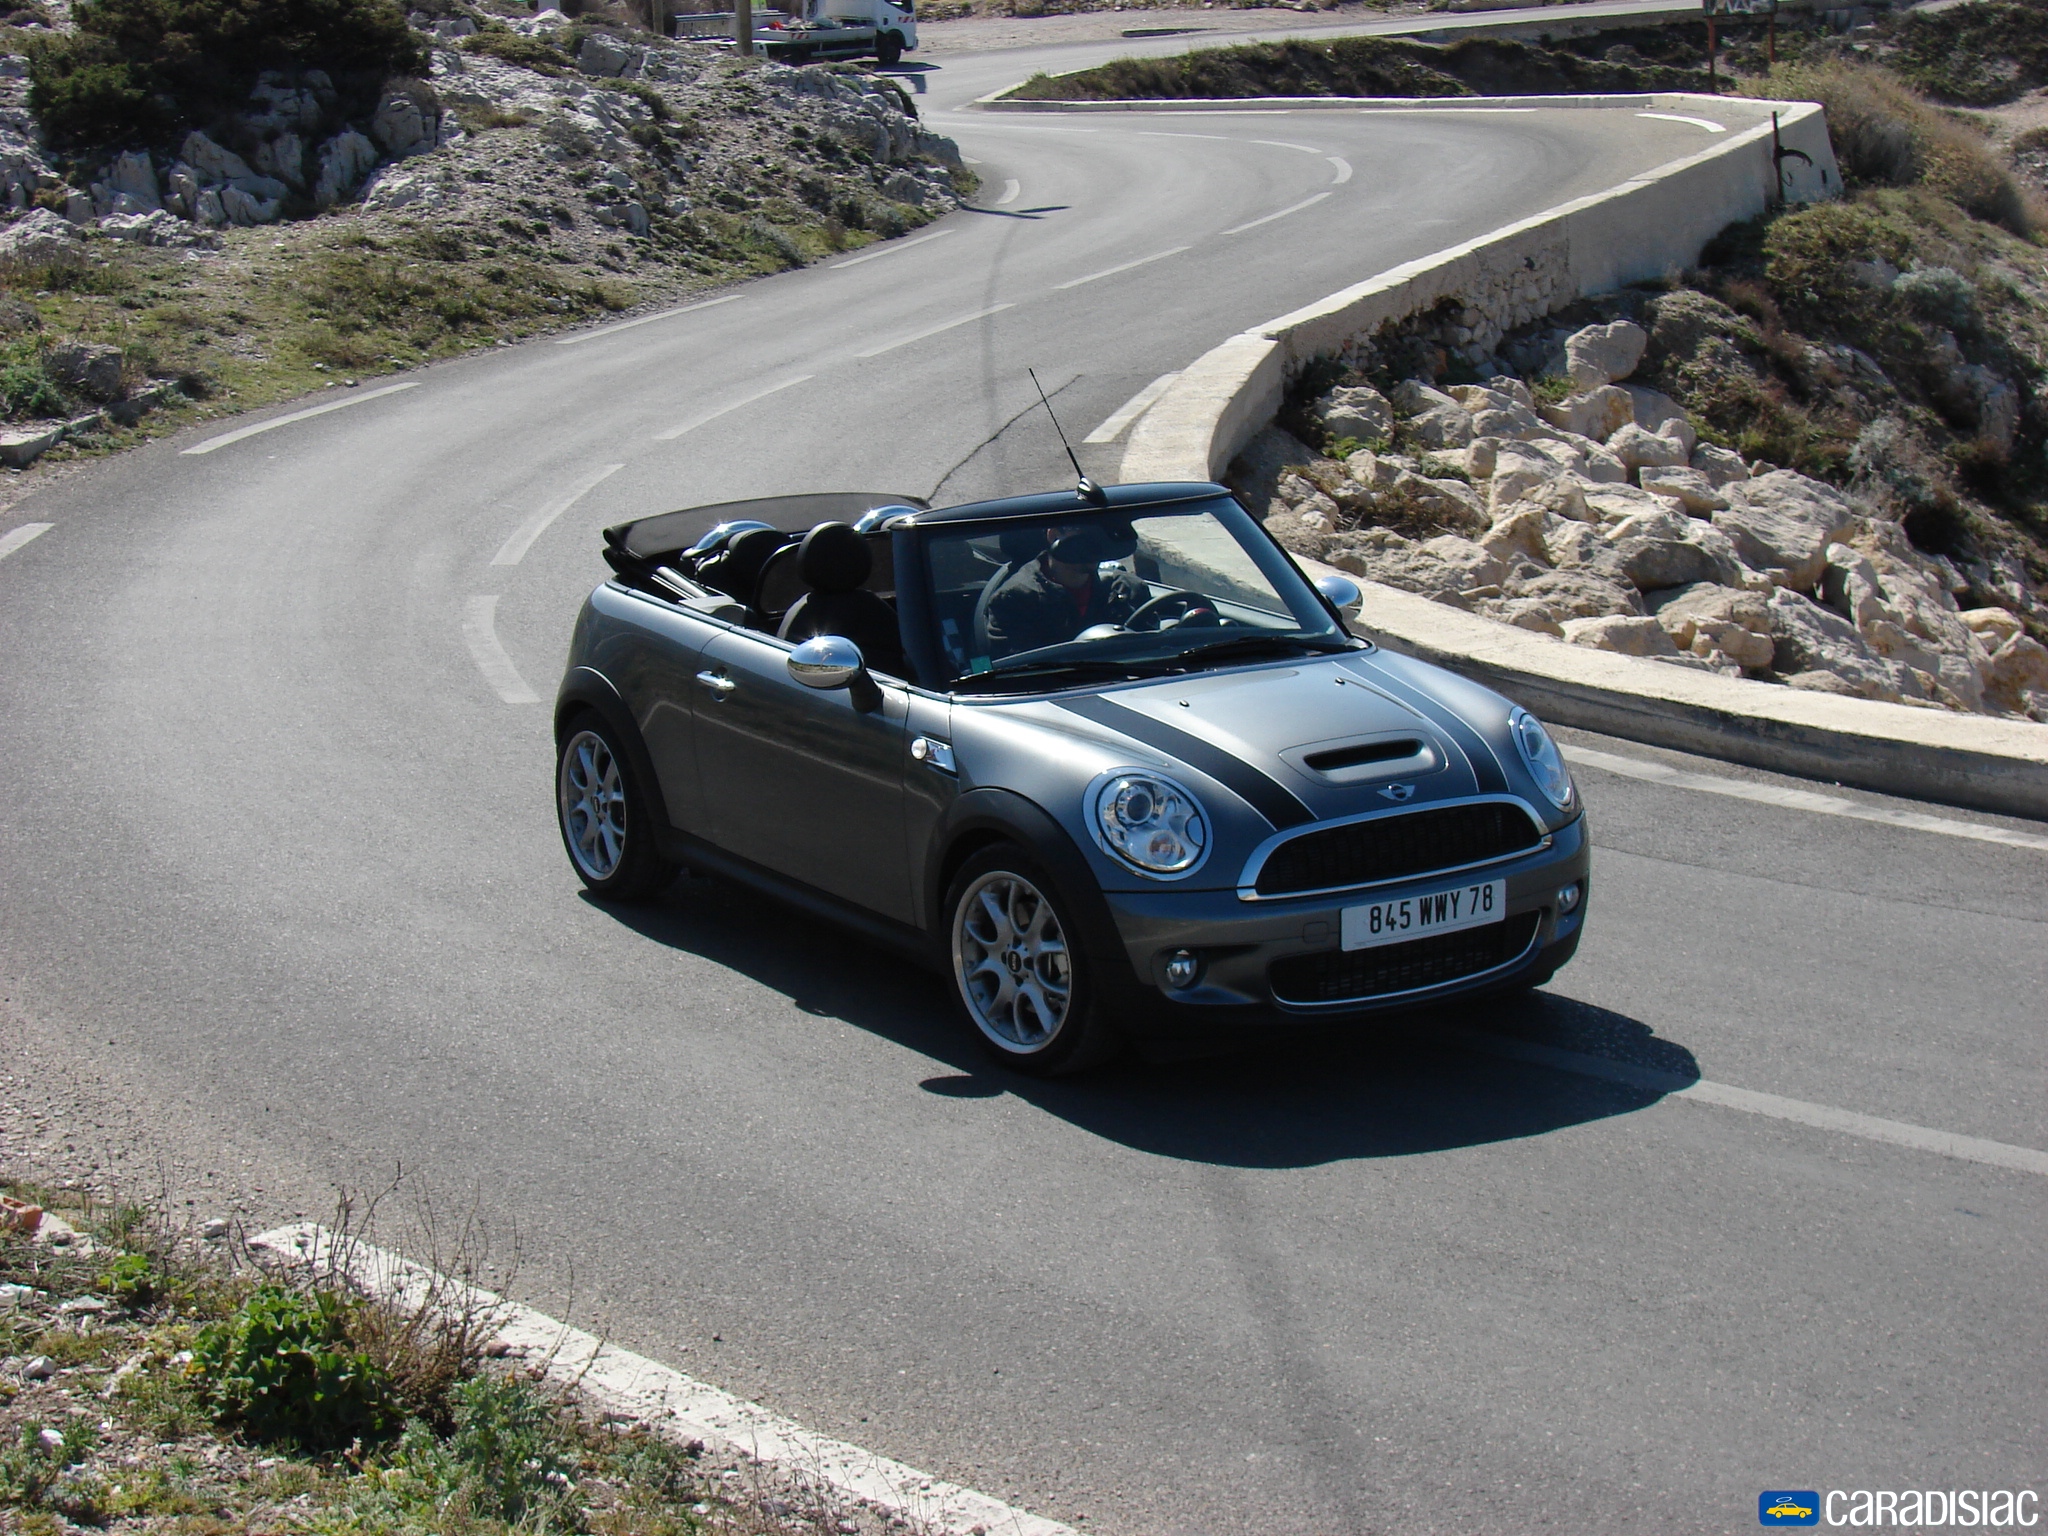 mini cabrio related images,251 to 300 - Zuoda Images